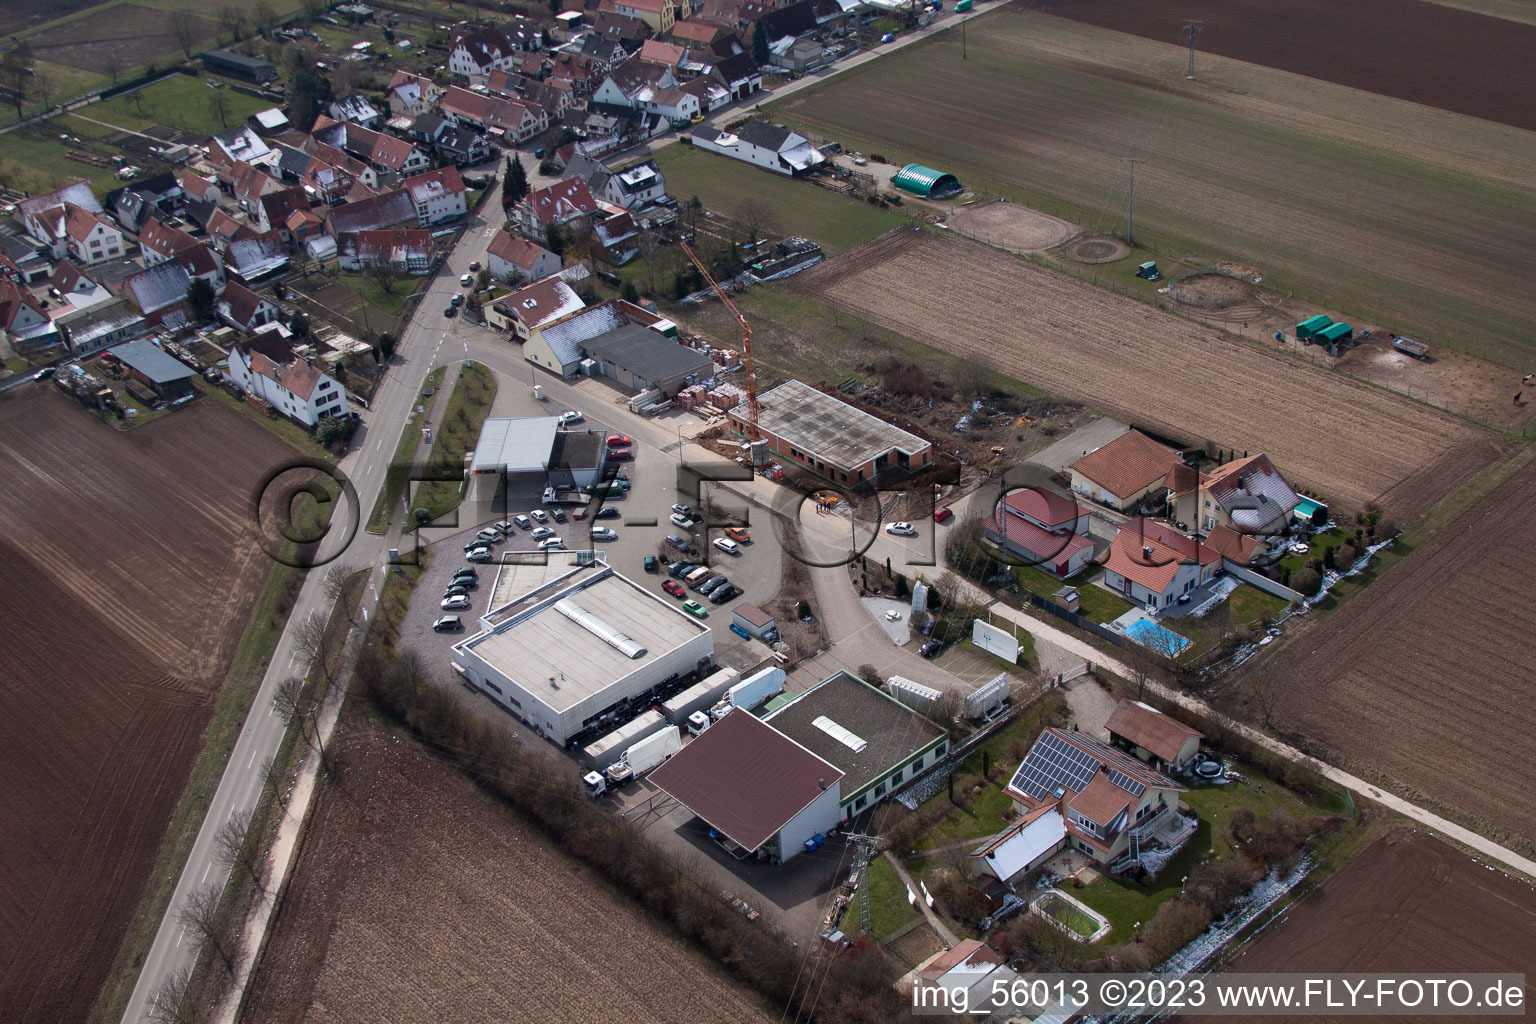 Industrial Estate in Freckenfeld in the state Rhineland-Palatinate, Germany from above